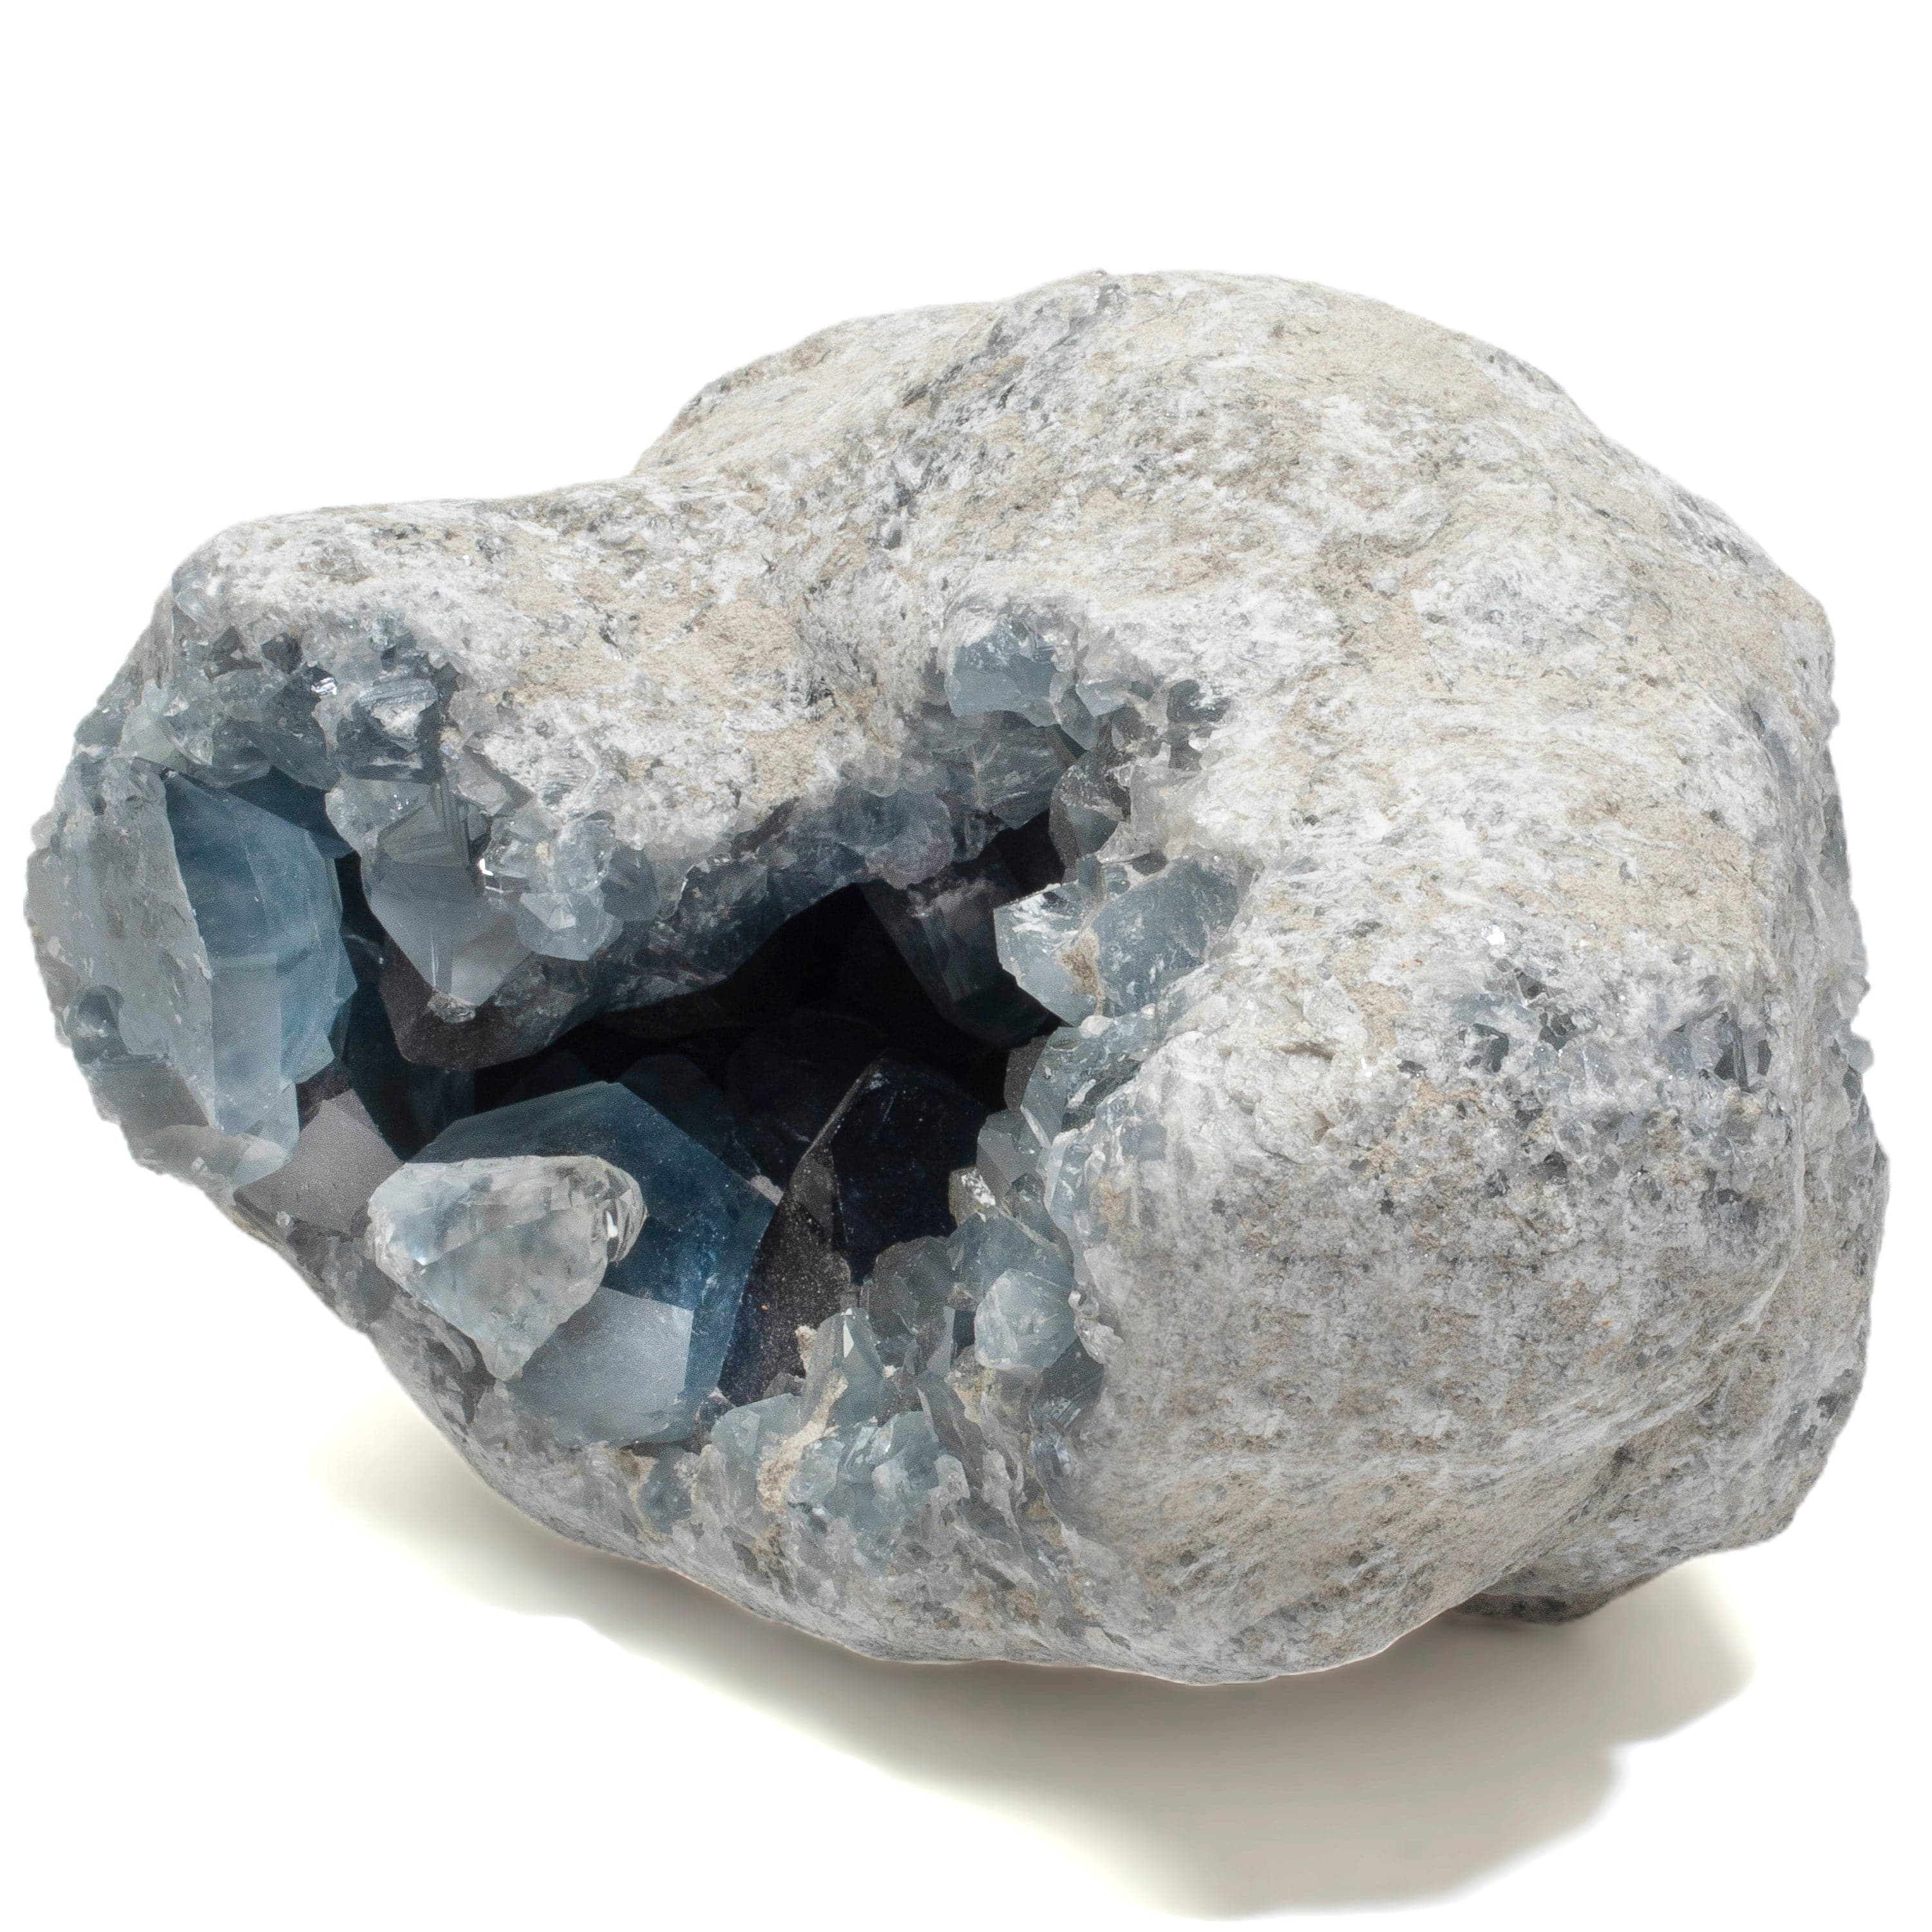 Kalifano Celestite Natural Celestite Crystal Cluster Geode from Madagascar - 8.5 in. CG2500.001